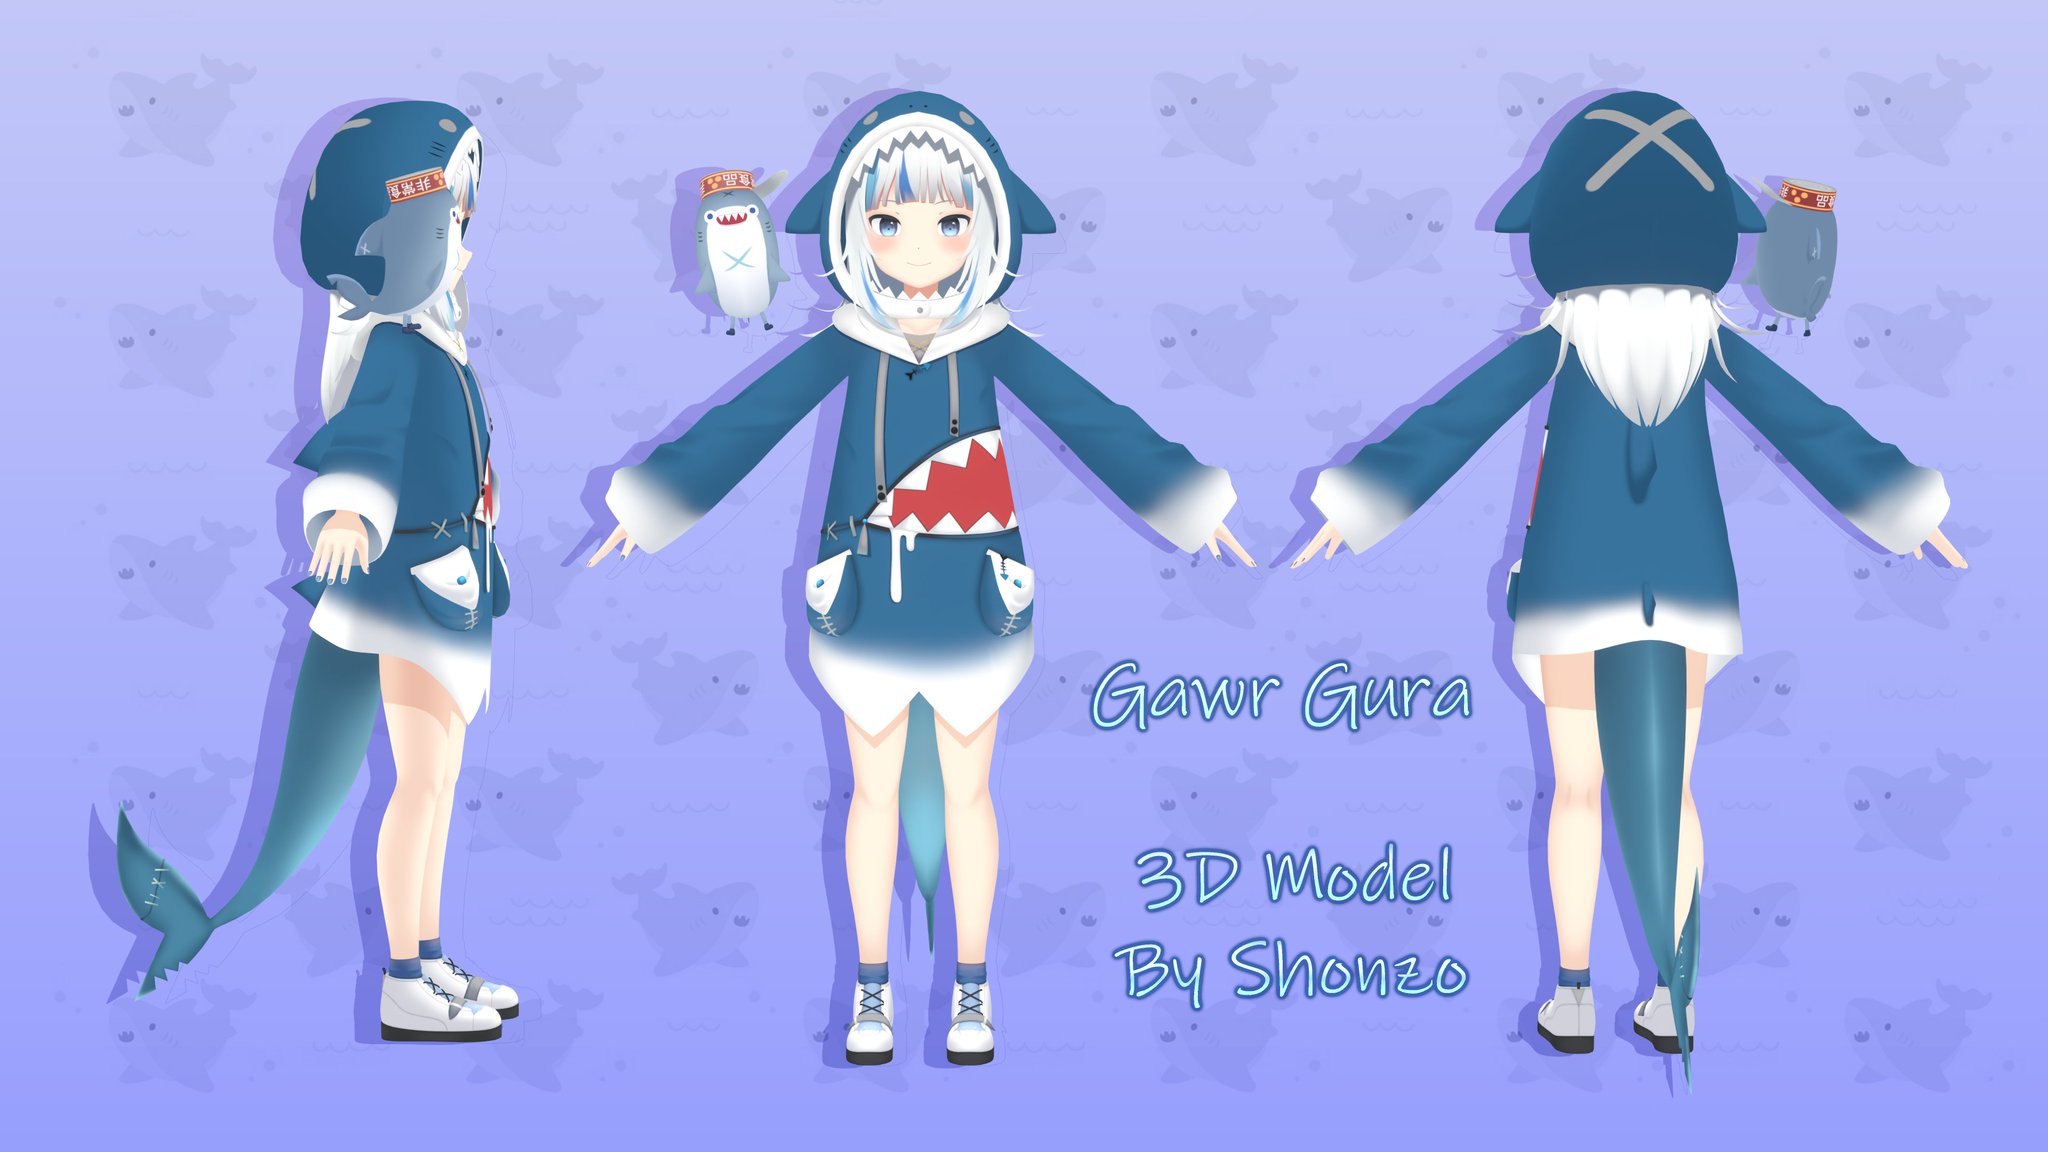 Shonzo 💼Working On Commissions💼 on Twitter: "Gawr Gura 3D model done